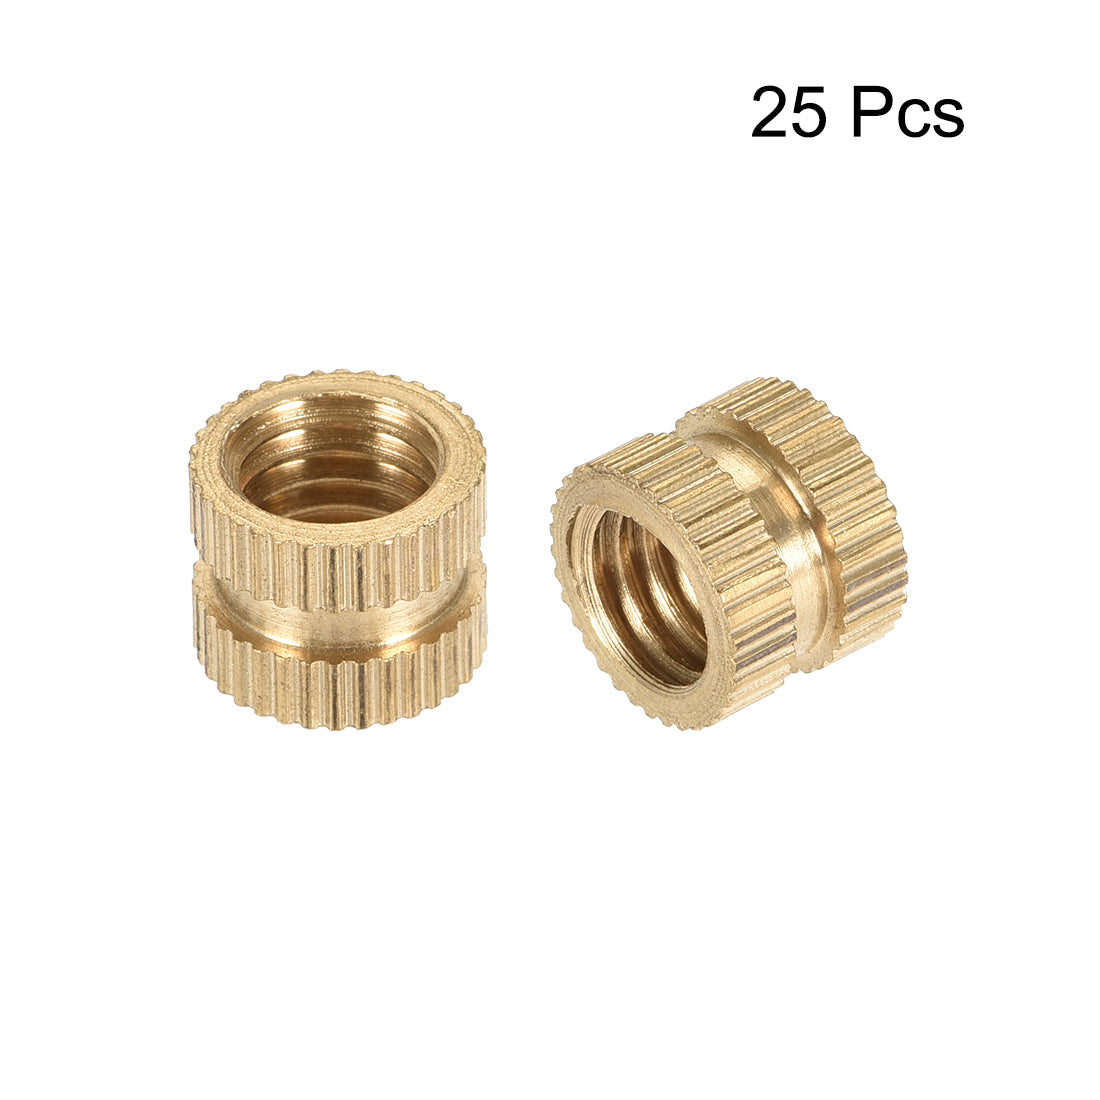 uxcell Uxcell M8x1.25mm Female Brass Knurled Threaded Insert Embedment Nut for 3D Printer, 25Pcs